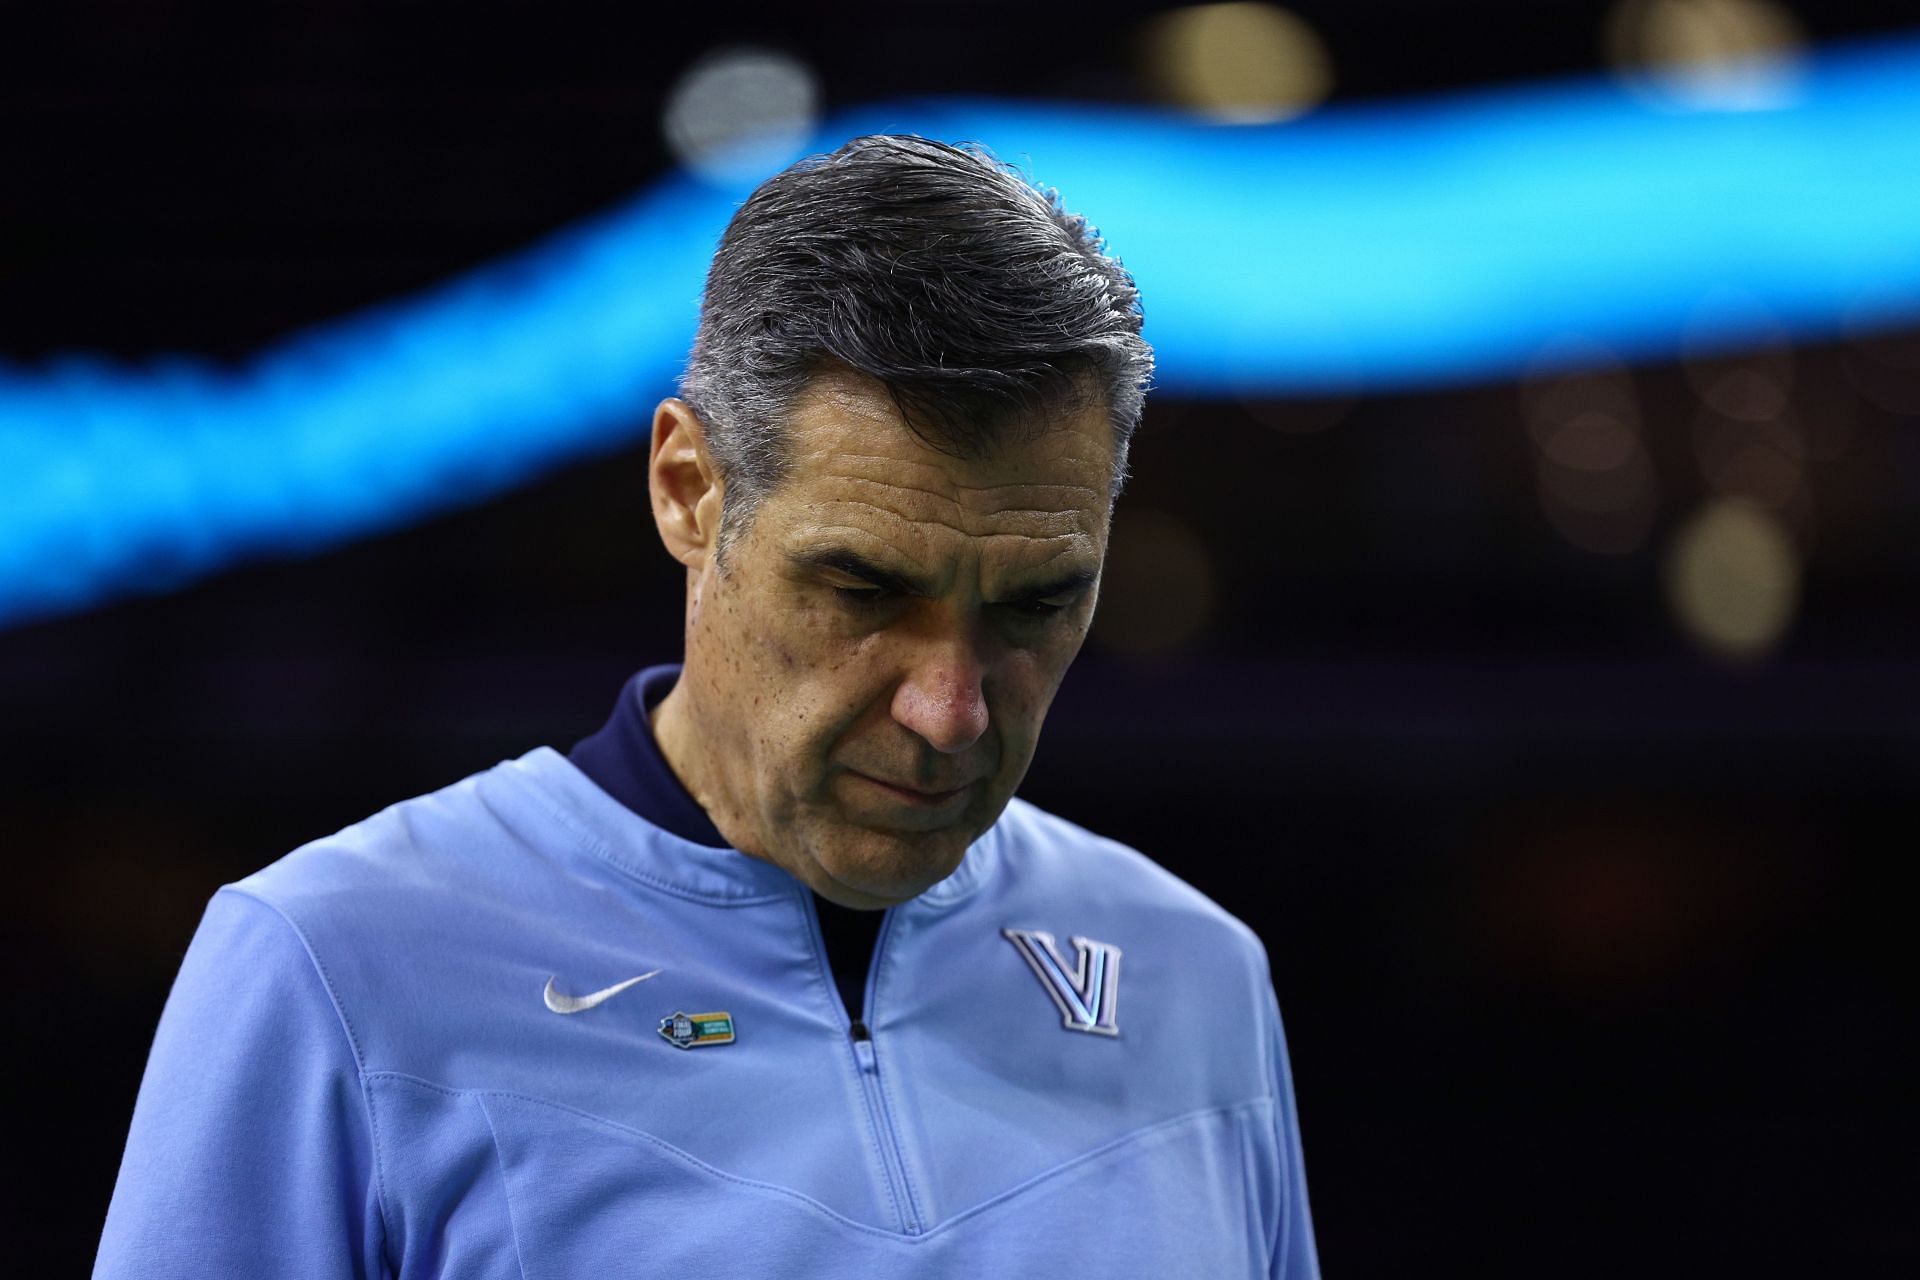 Jay Wright appears to be retiring after a legendary career with the Wildcats.